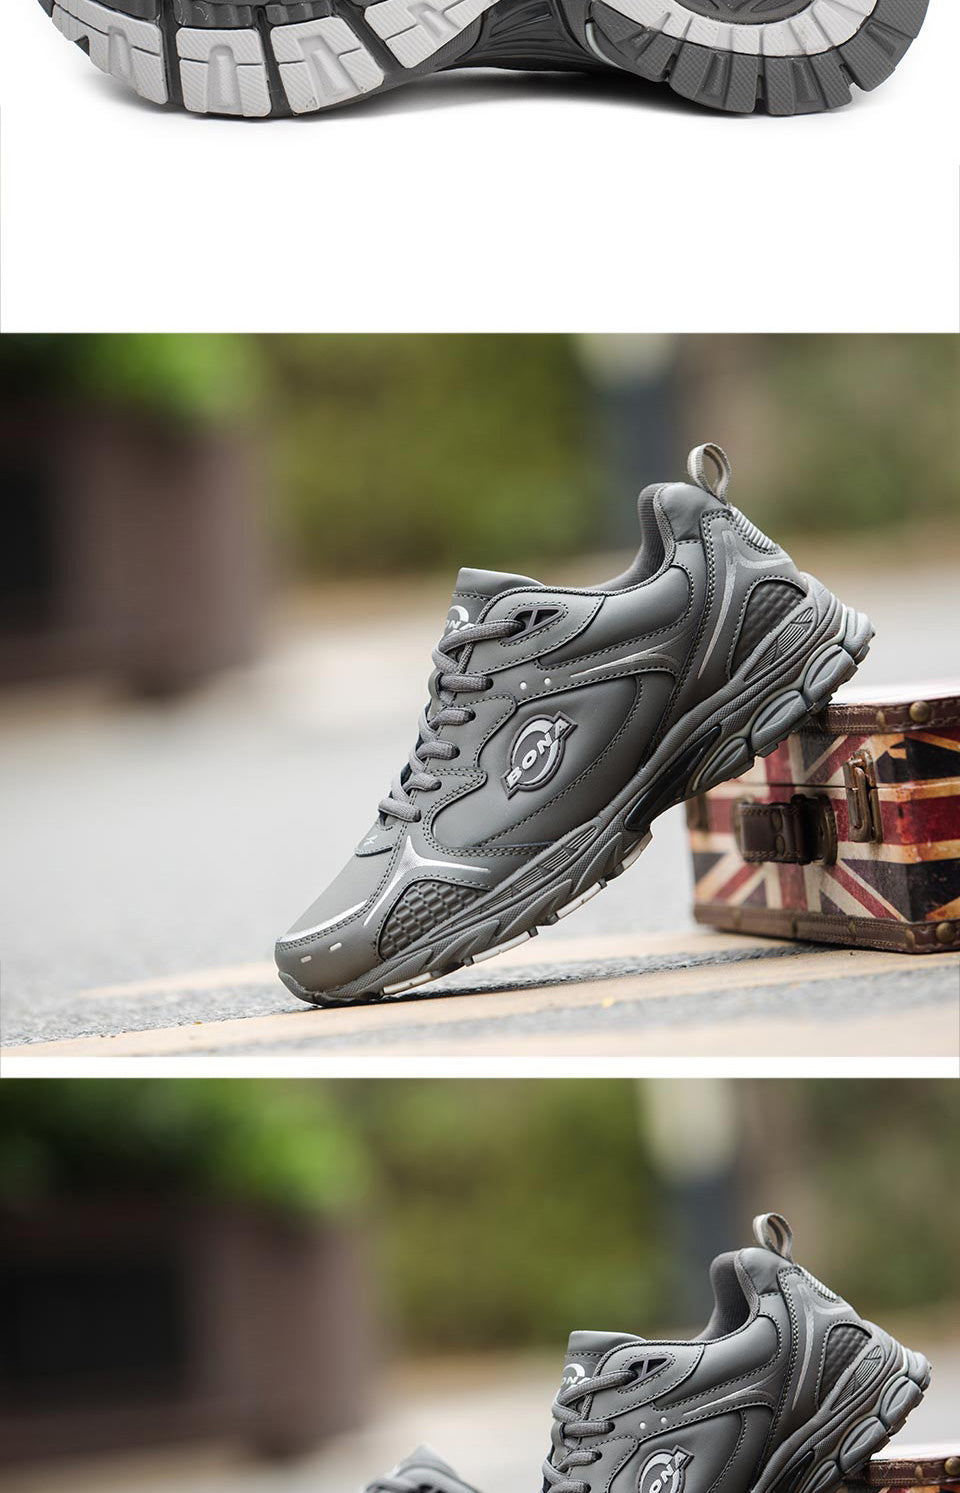 Classics Style Men Running Shoes Lace Up, Men Sport Shoes, Leather Men Outdoor Jogging Sneakers Comfortable